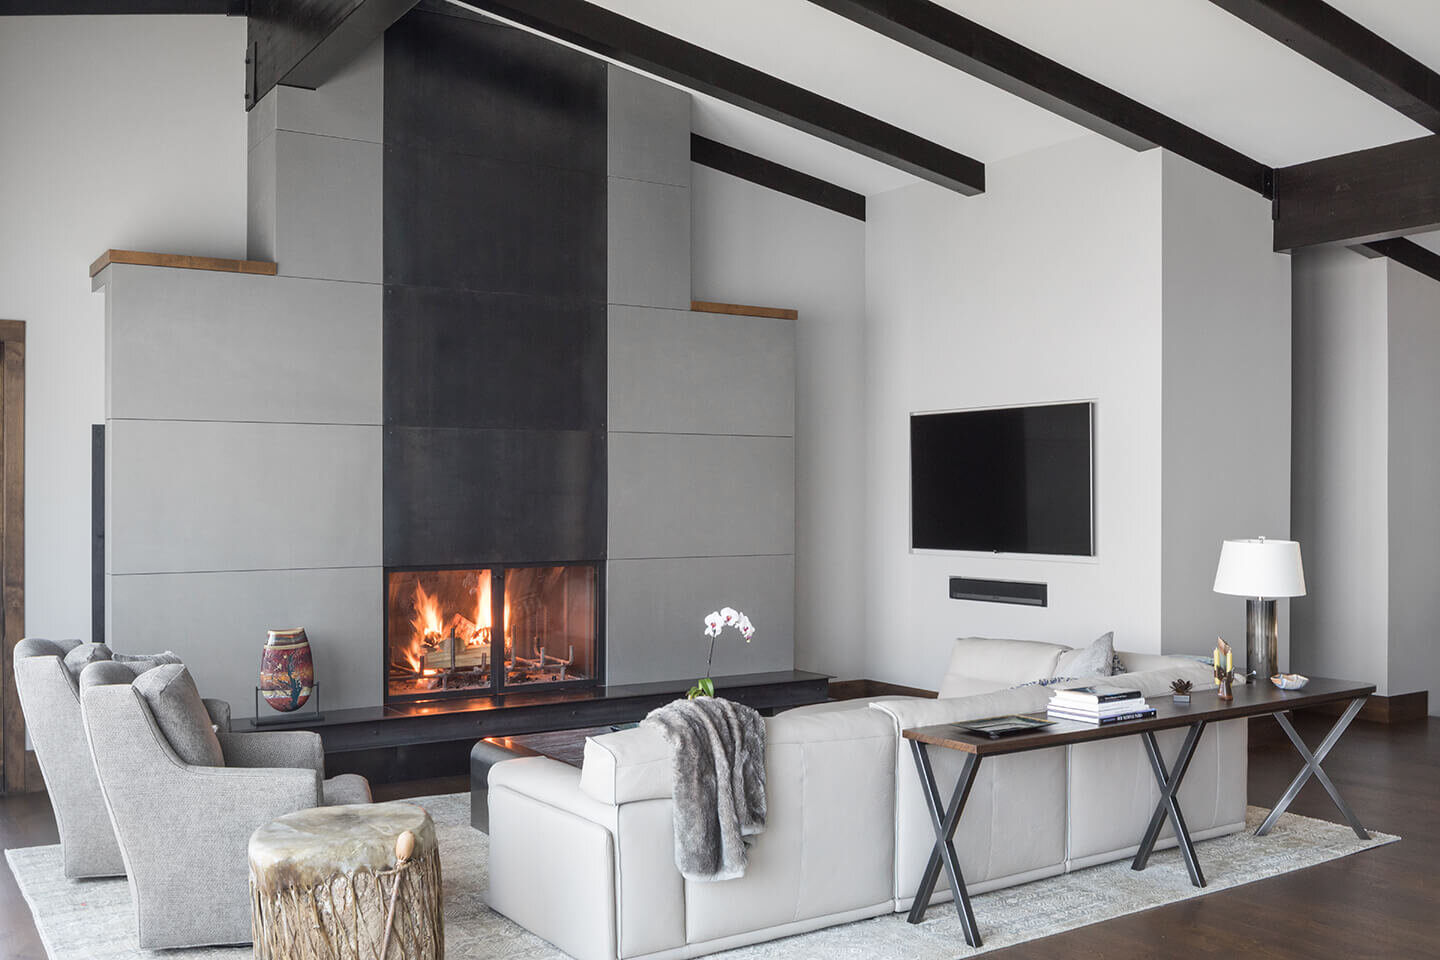 Living room with clean aesthetics and fireplace